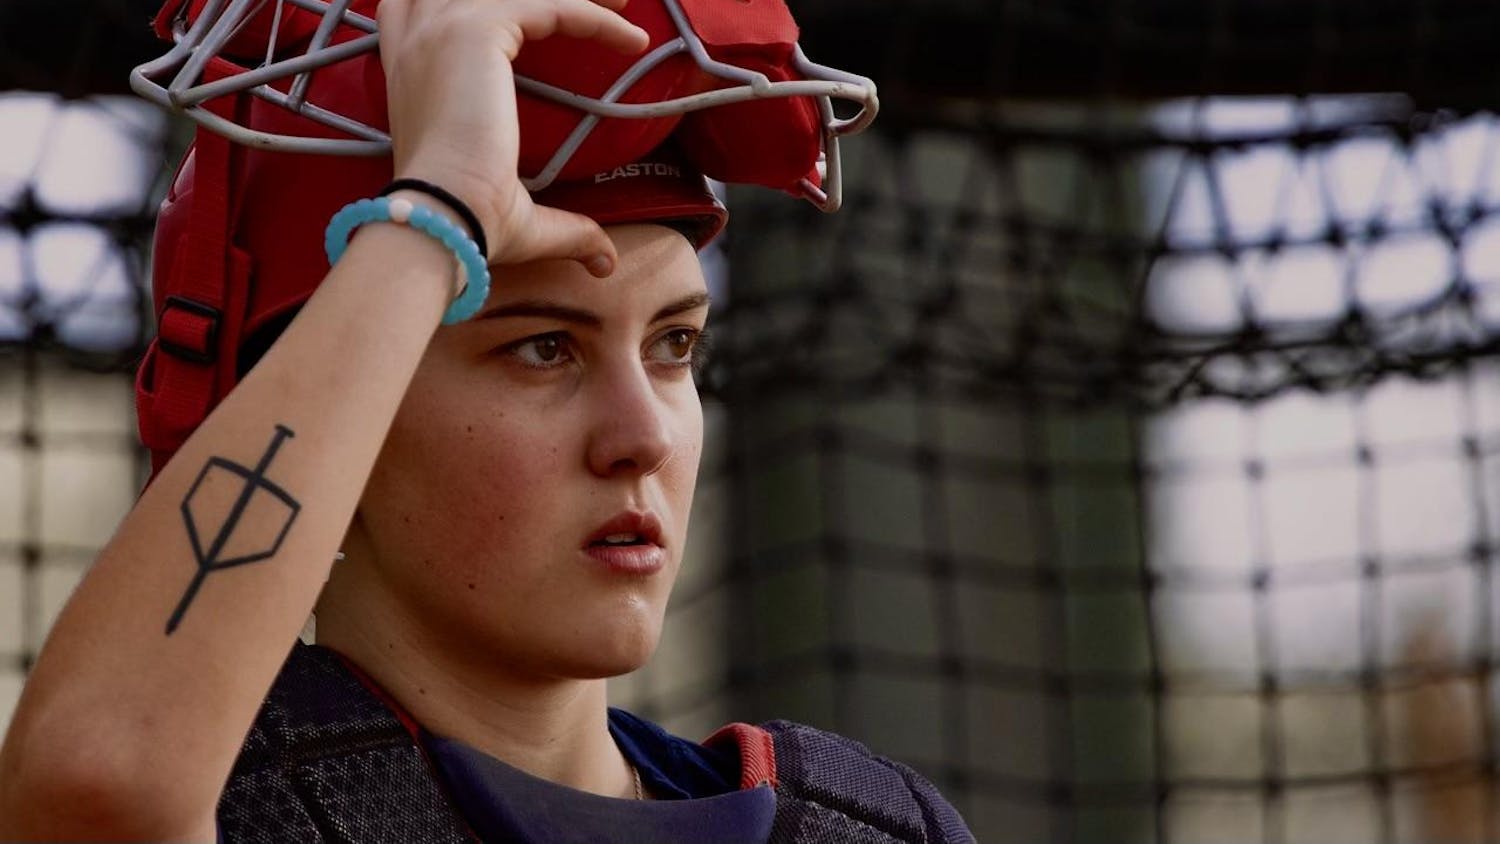 Third-year exercise science student Meredith McFadden is the first woman to hold the position of bullpen catcher for a Power Five baseball program. McFadden, who started playing baseball at age 4, is in her second year with the South Carolina baseball program.